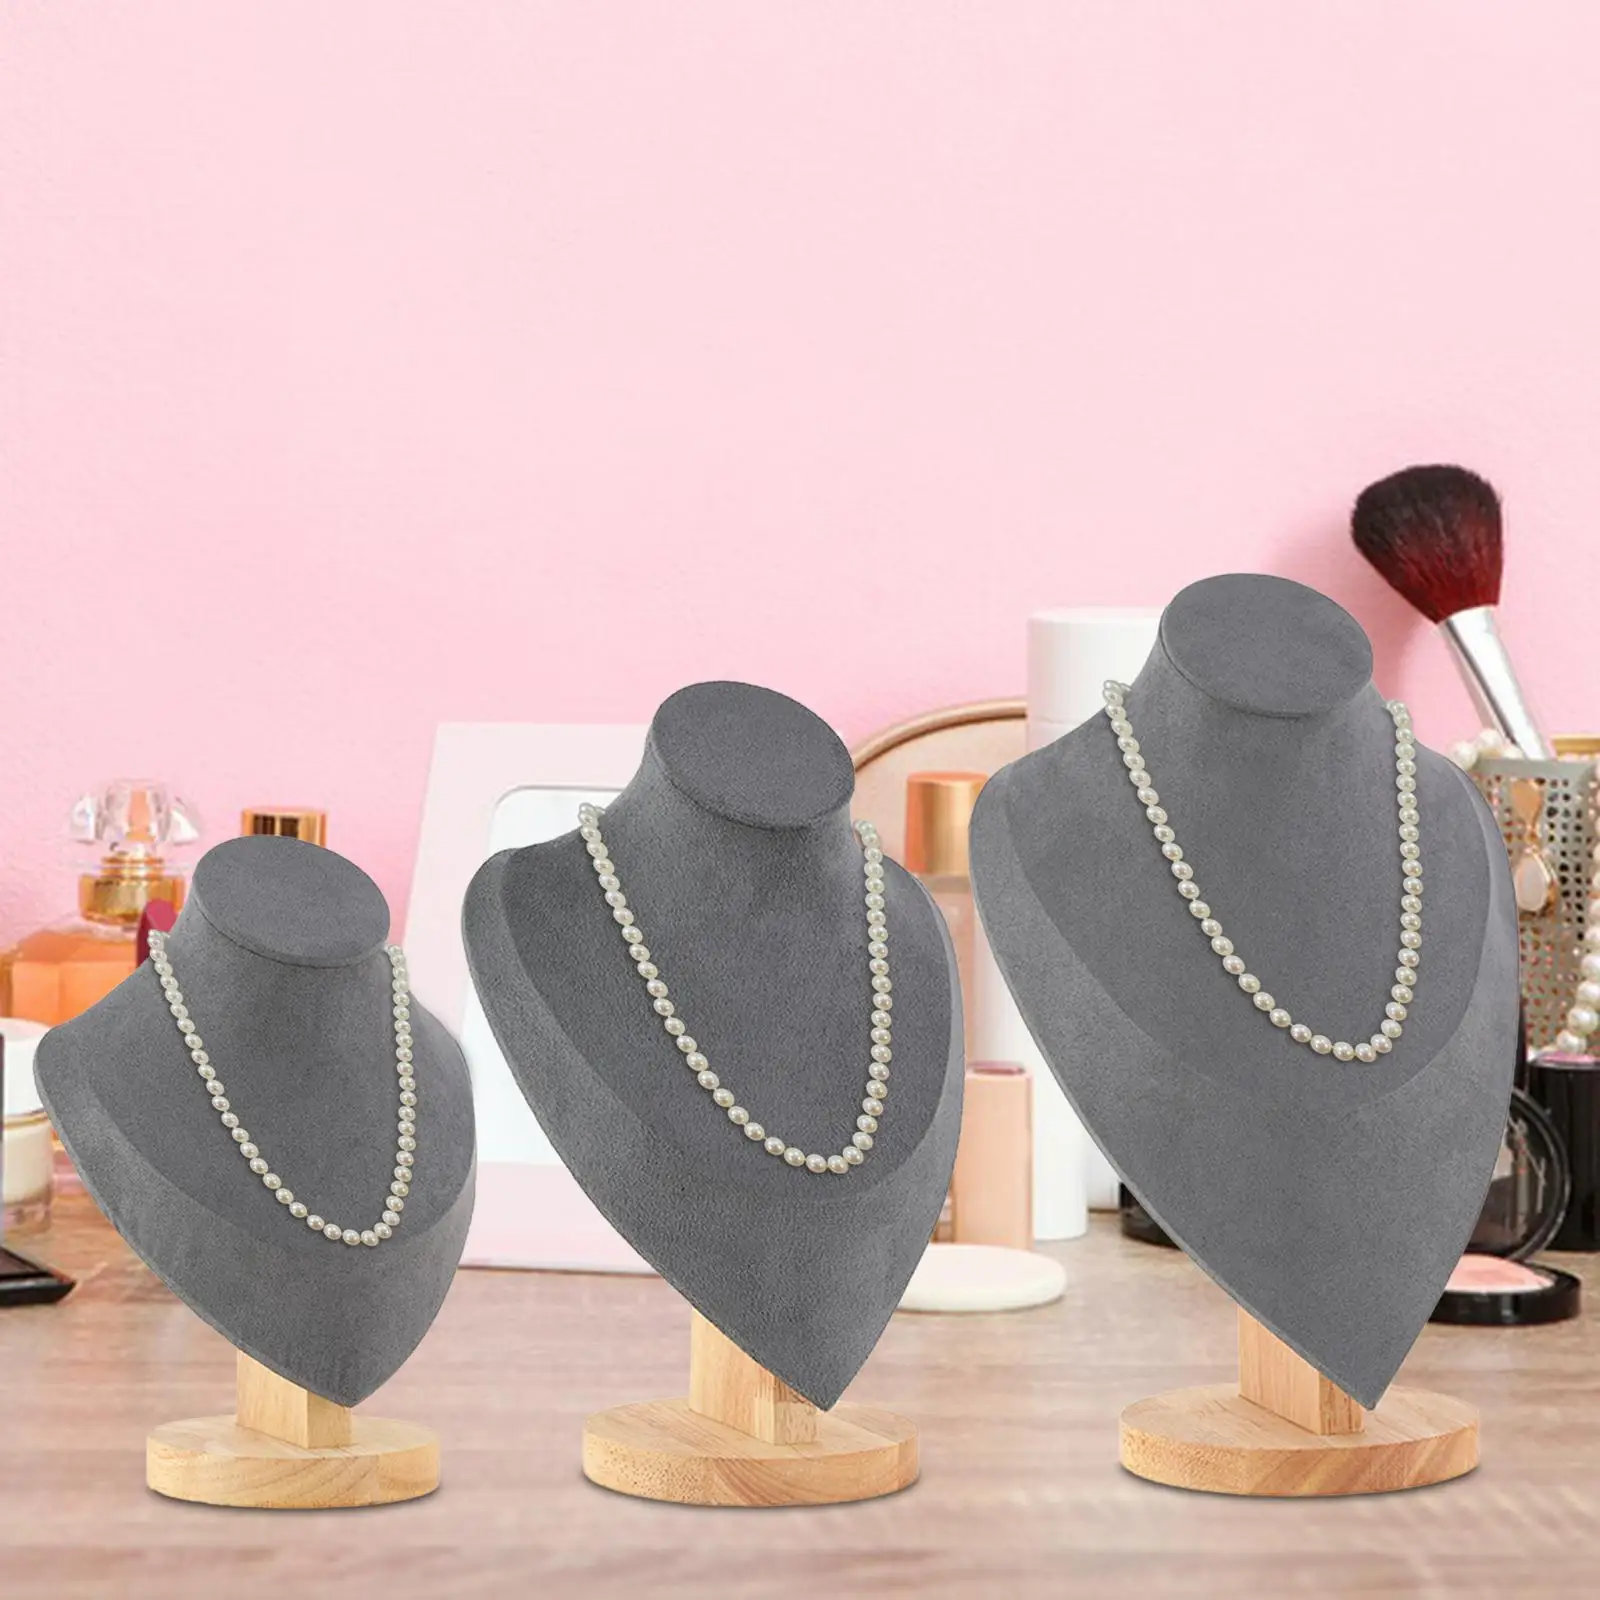 Jewelry Display Mannequin Bust Wooden Base Stable Elegant Necklace Display Bust for Showroom Retail Stores Salon Dresser Shelves